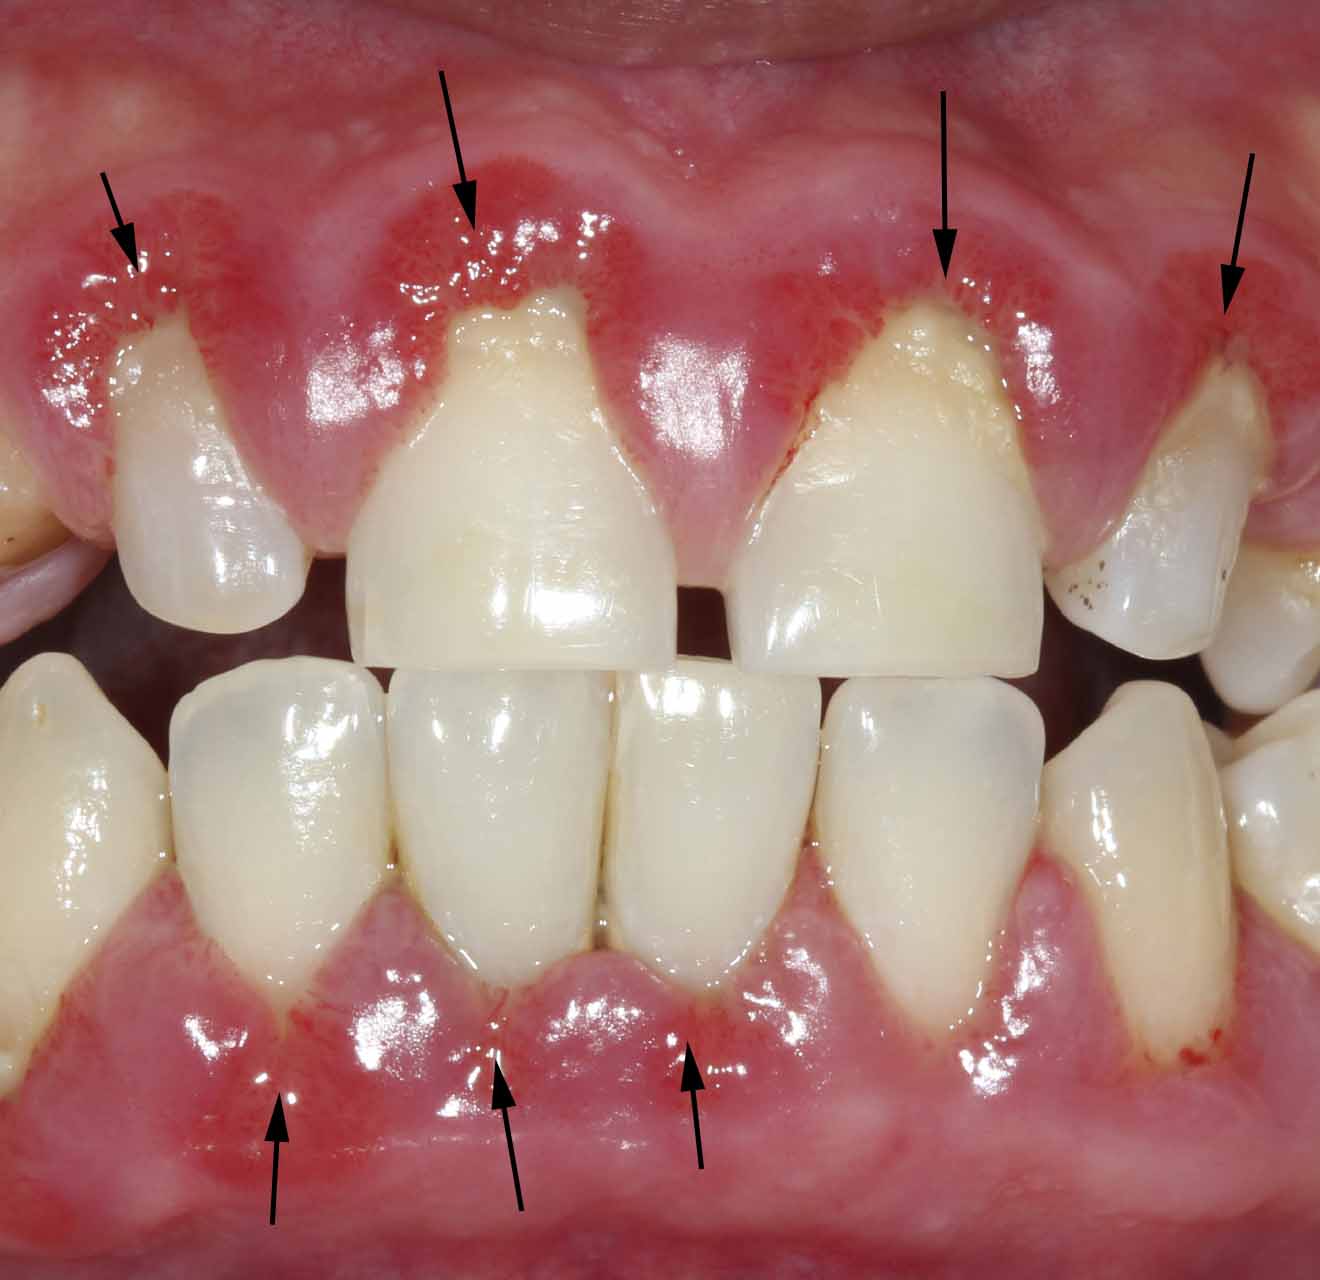 gums with gingivitis